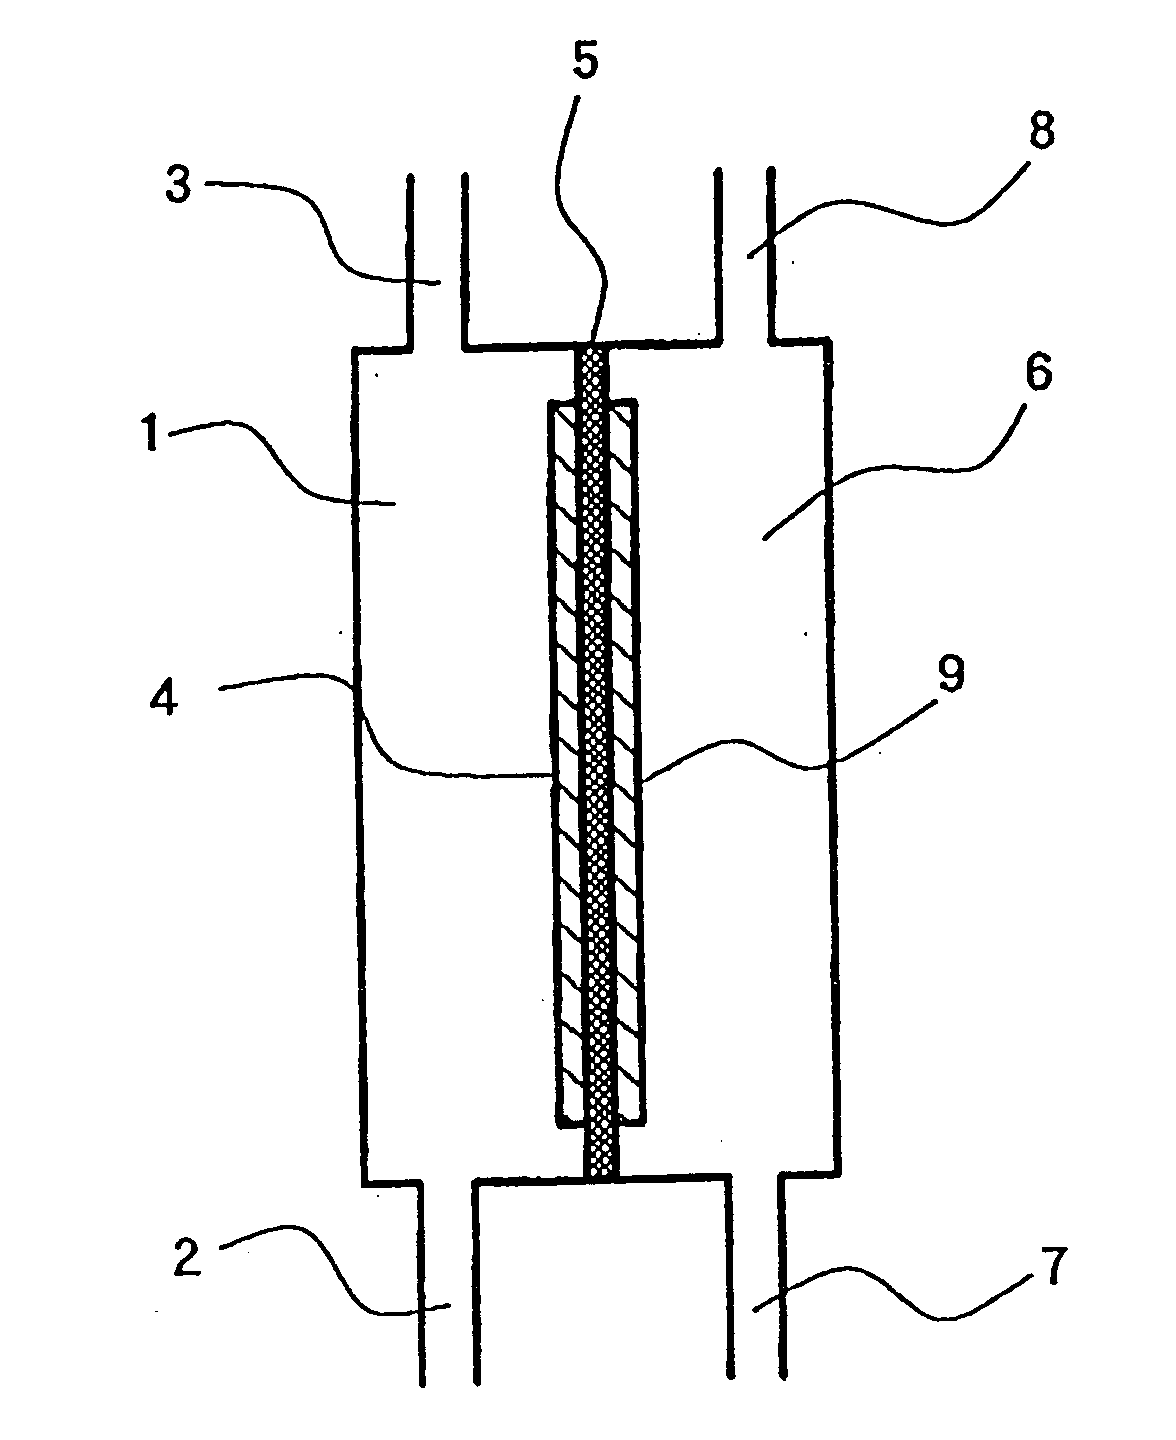 Electrolytic cell for producing charger anode water suitable for surface cleaning or treatment, and method for producing the same and use of the same